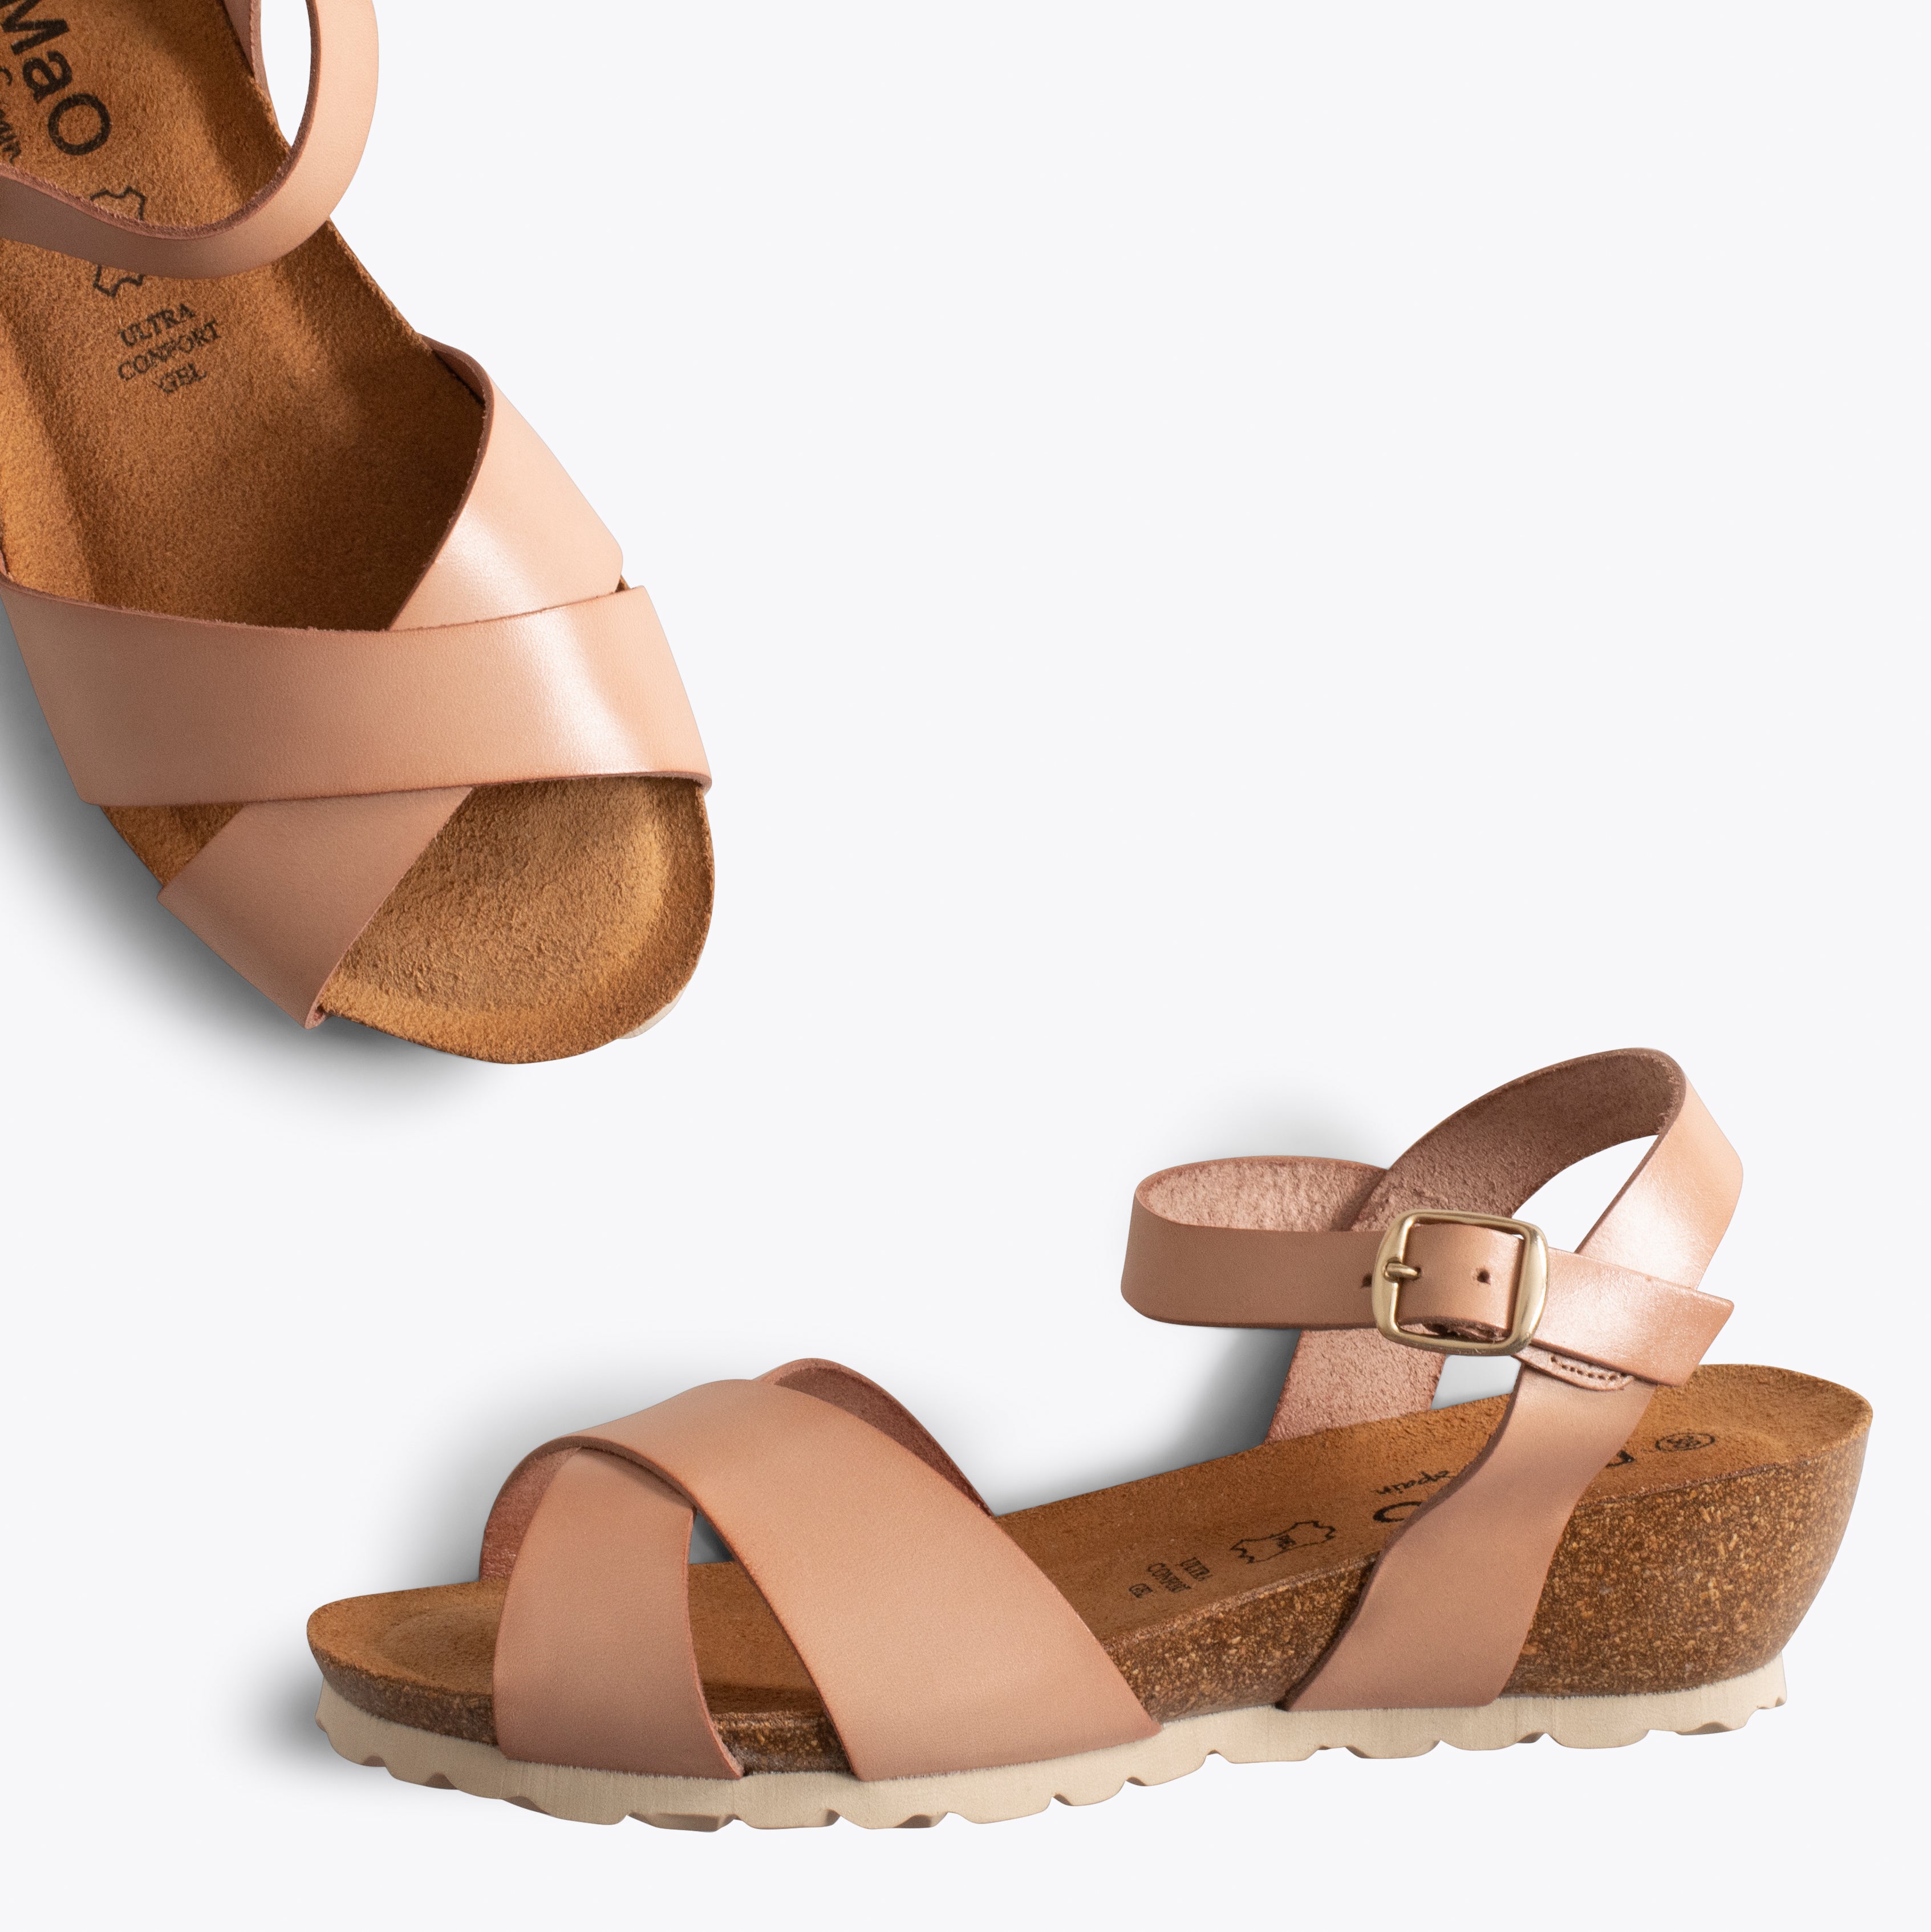 LOTO – NUDE wedge sandals with BIO sole